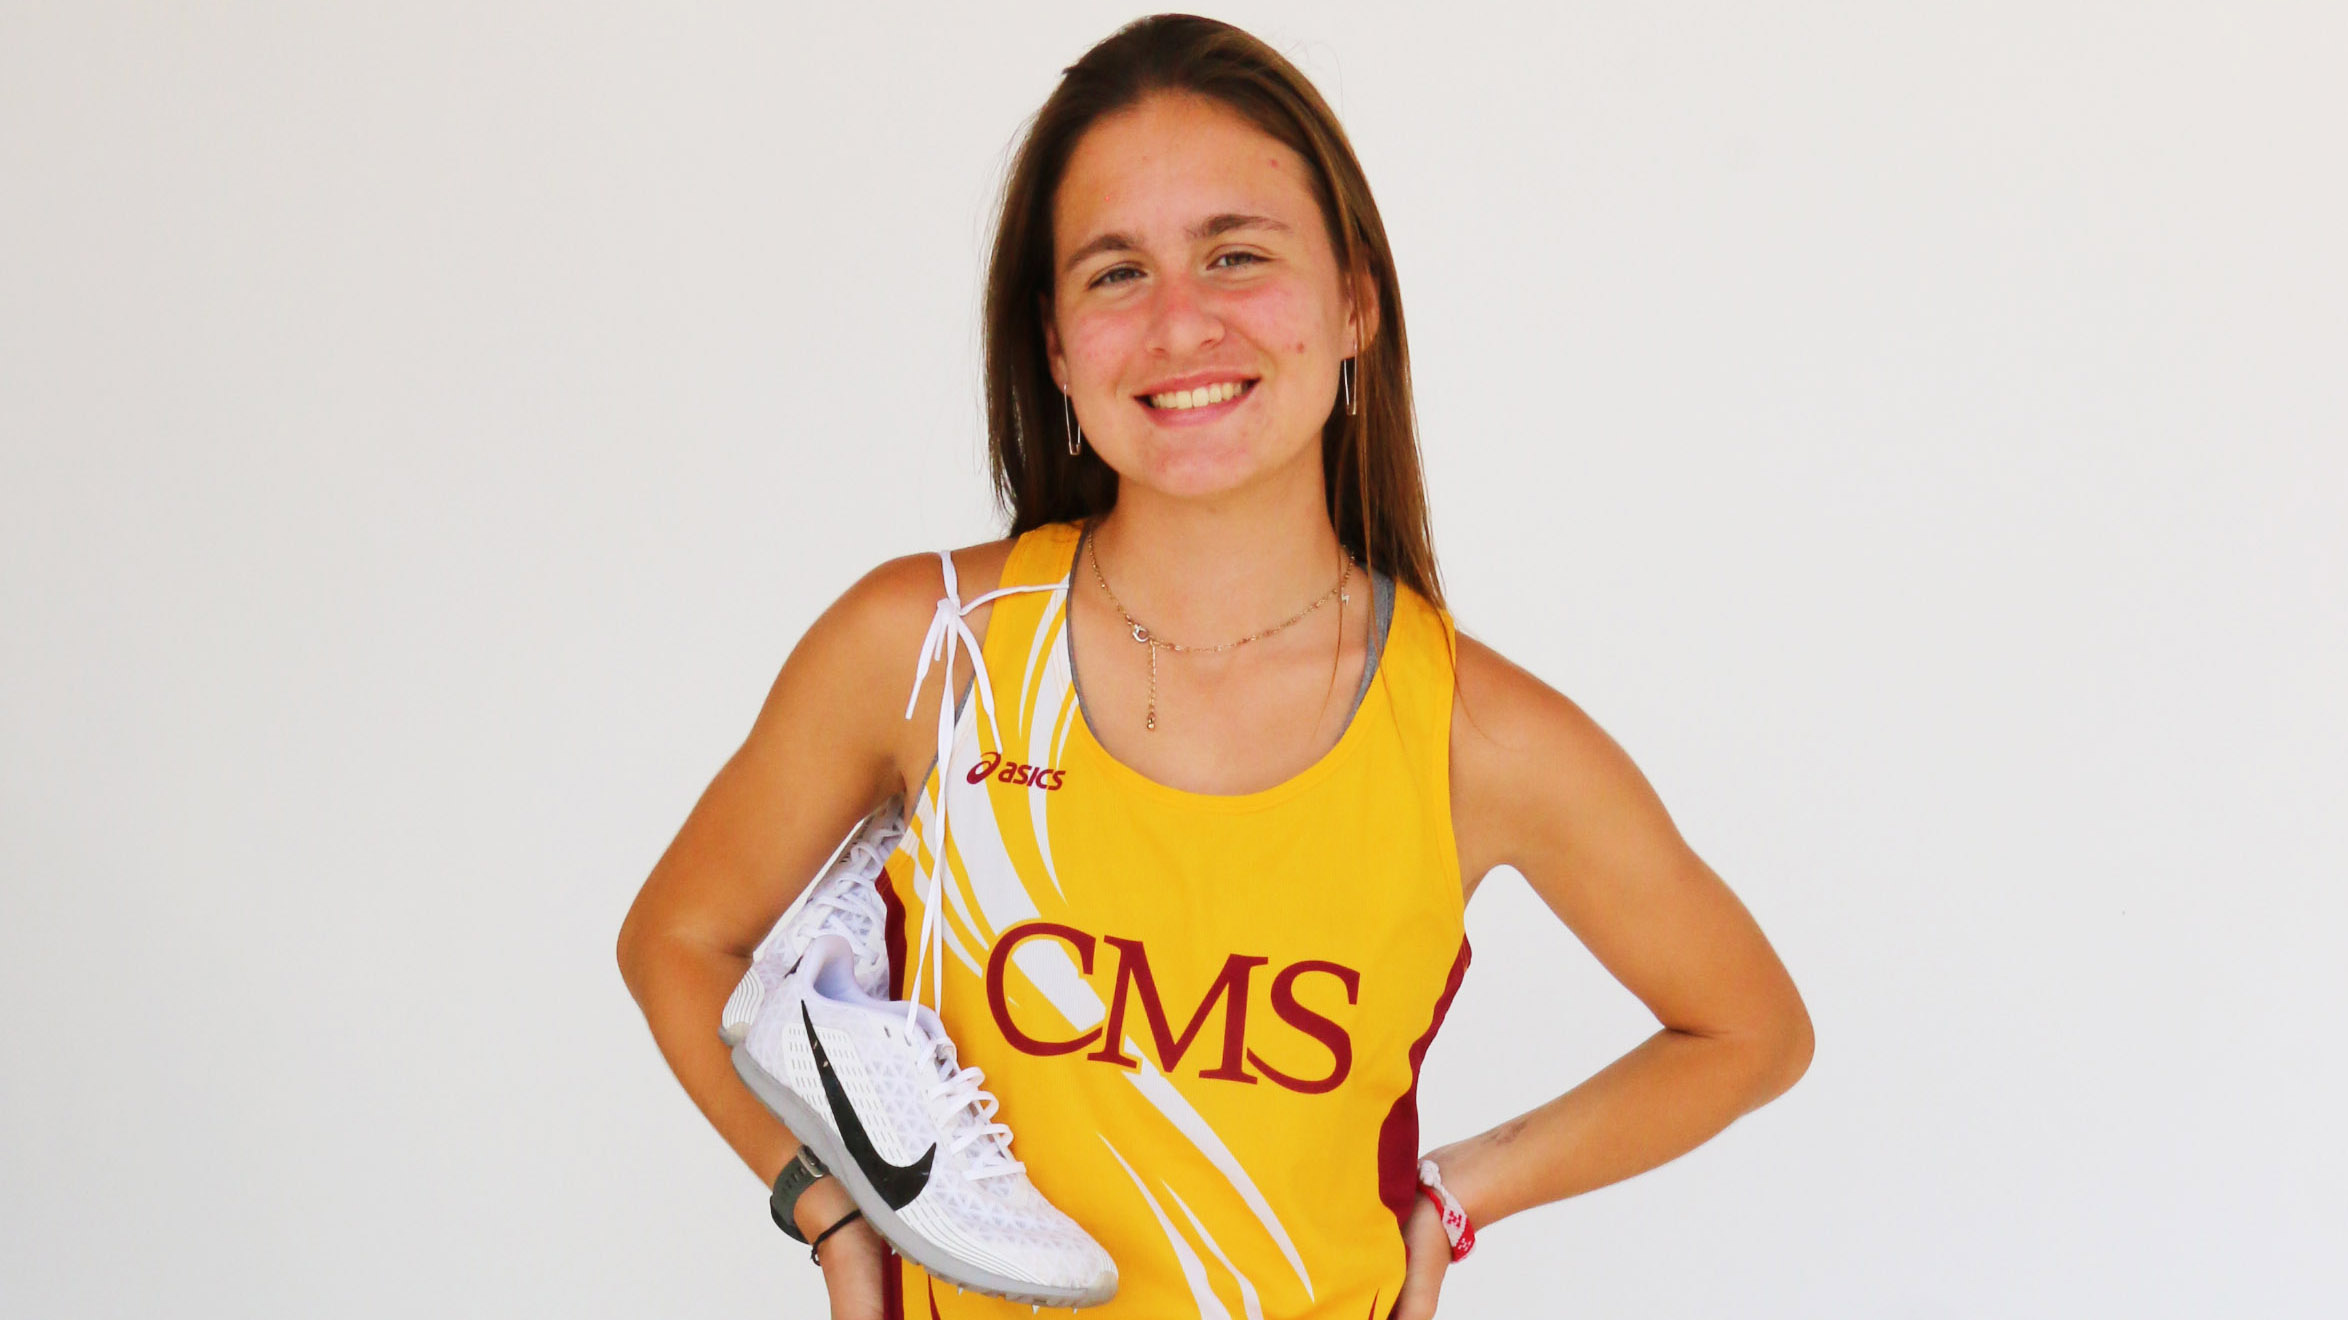 Meredith Bloss set a new CMS record for a 6K with a time of 20:31.0